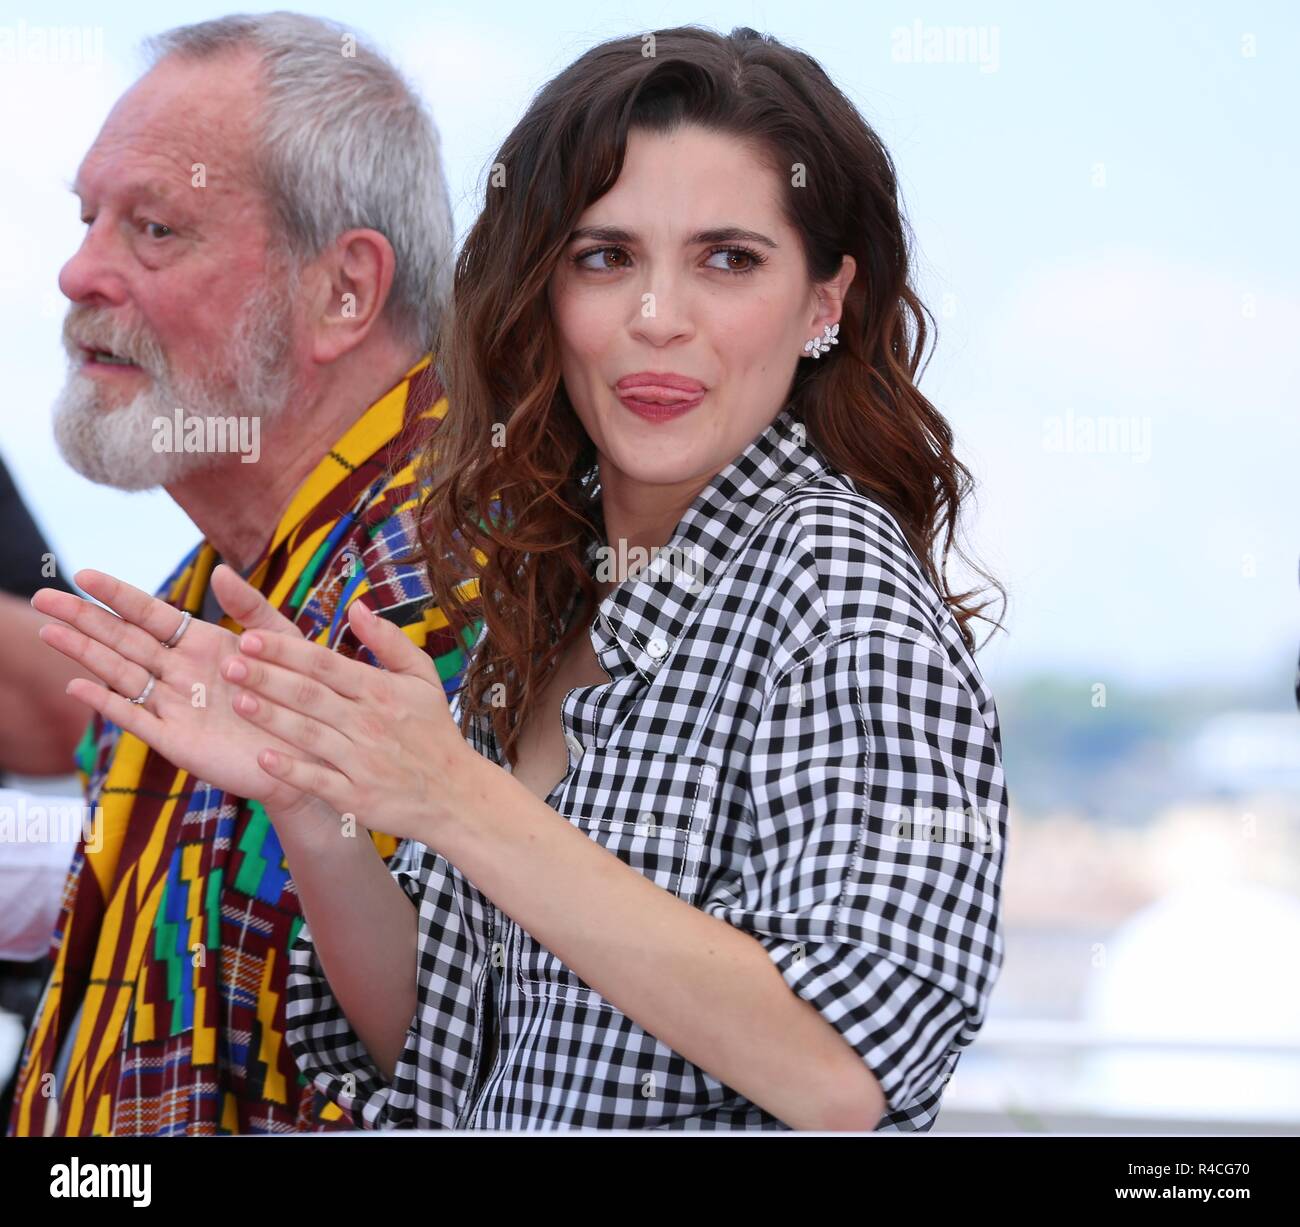 CANNES, FRANCE – MAY 19, 2018: Joana Ribeiro at the 'The Man Who Killed Don Quixote' photocall during the 71st Cannes Film Festival Stock Photo